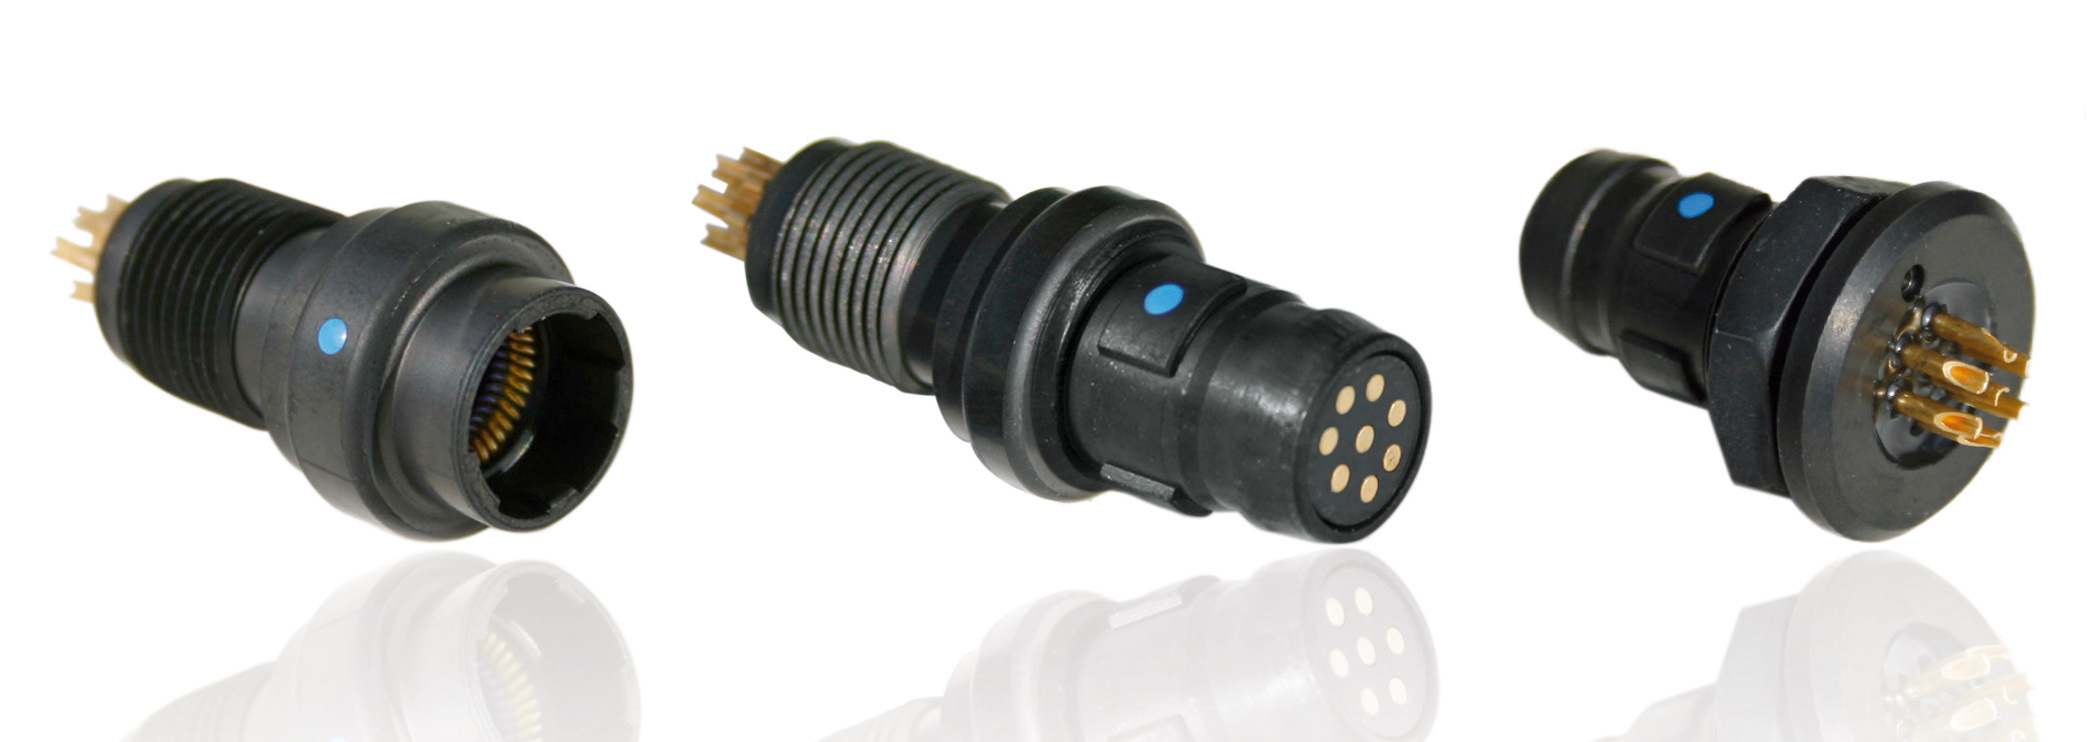 ITT Cannon Nemesis II CBA connector for military wearables